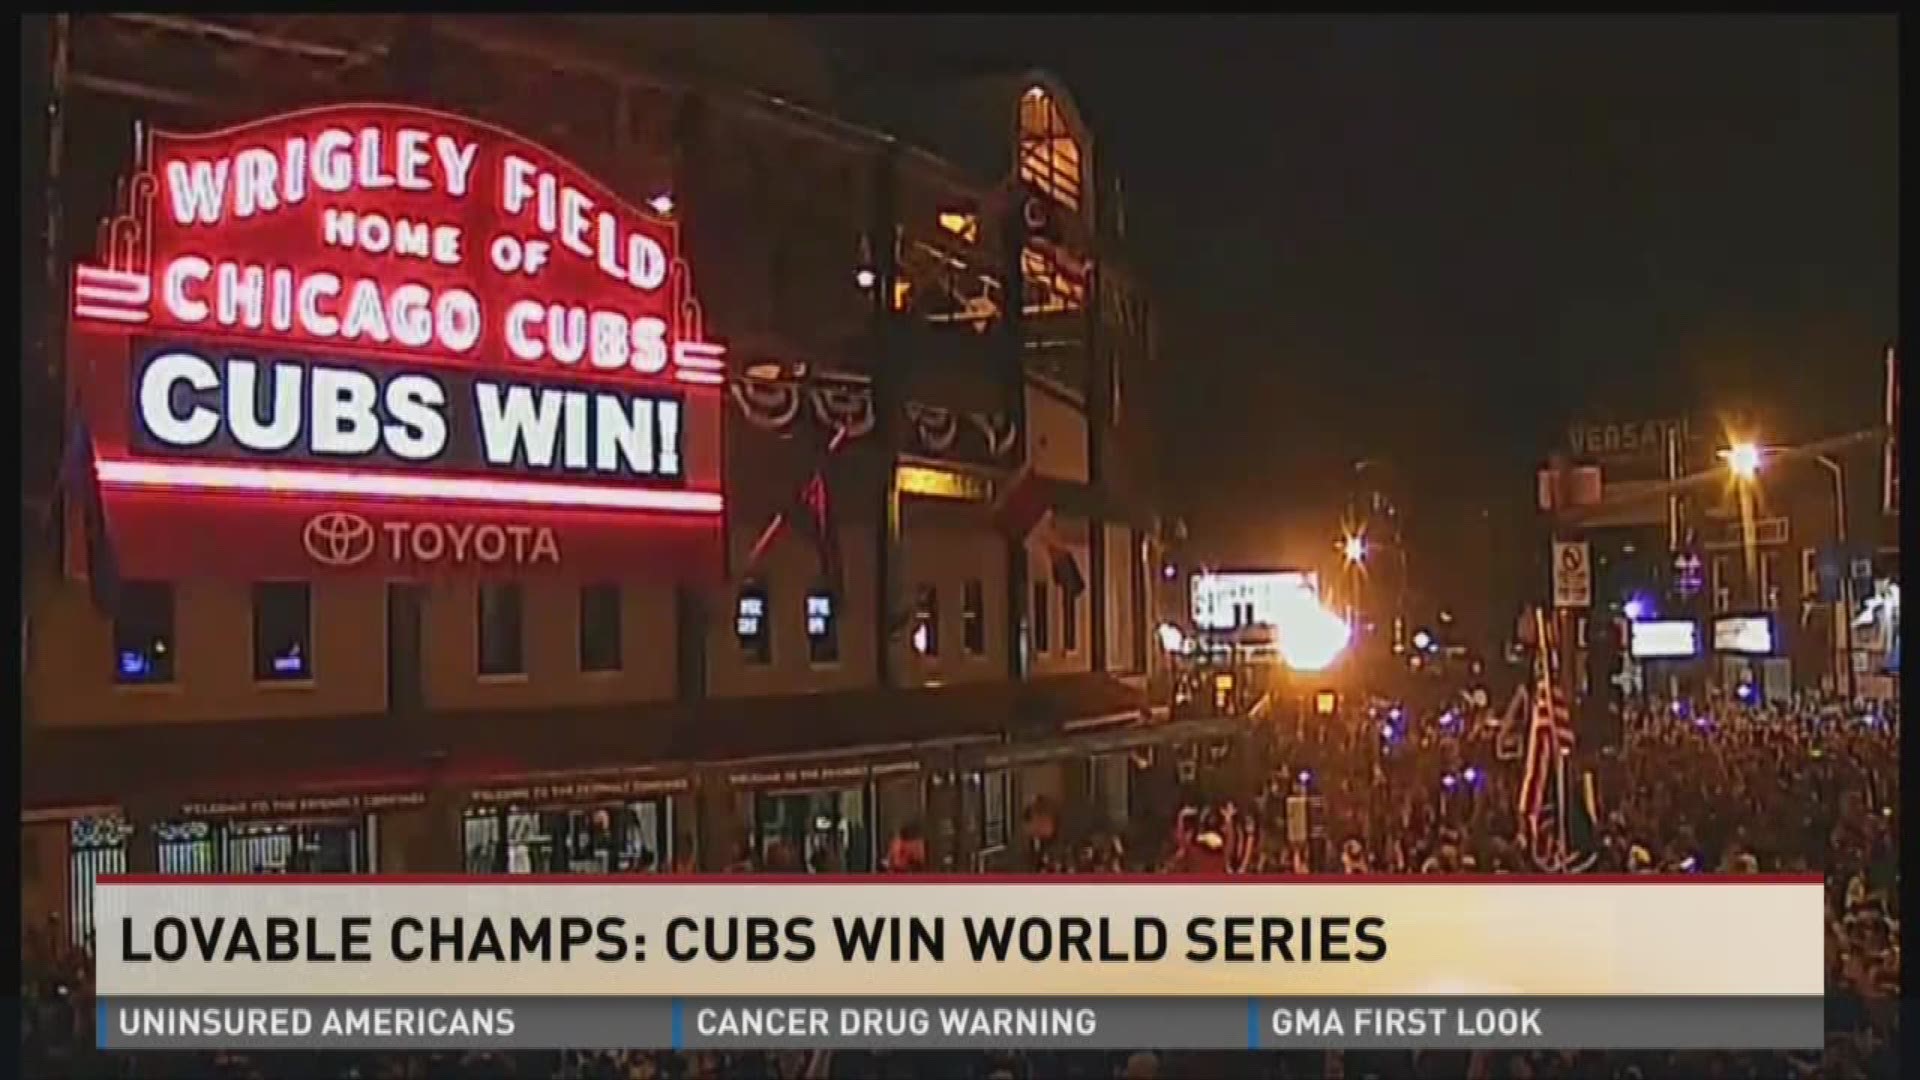 Producer Matt shares a personal story about the Chicago Cubs and why Wednesday's World Series win means so much to fans.